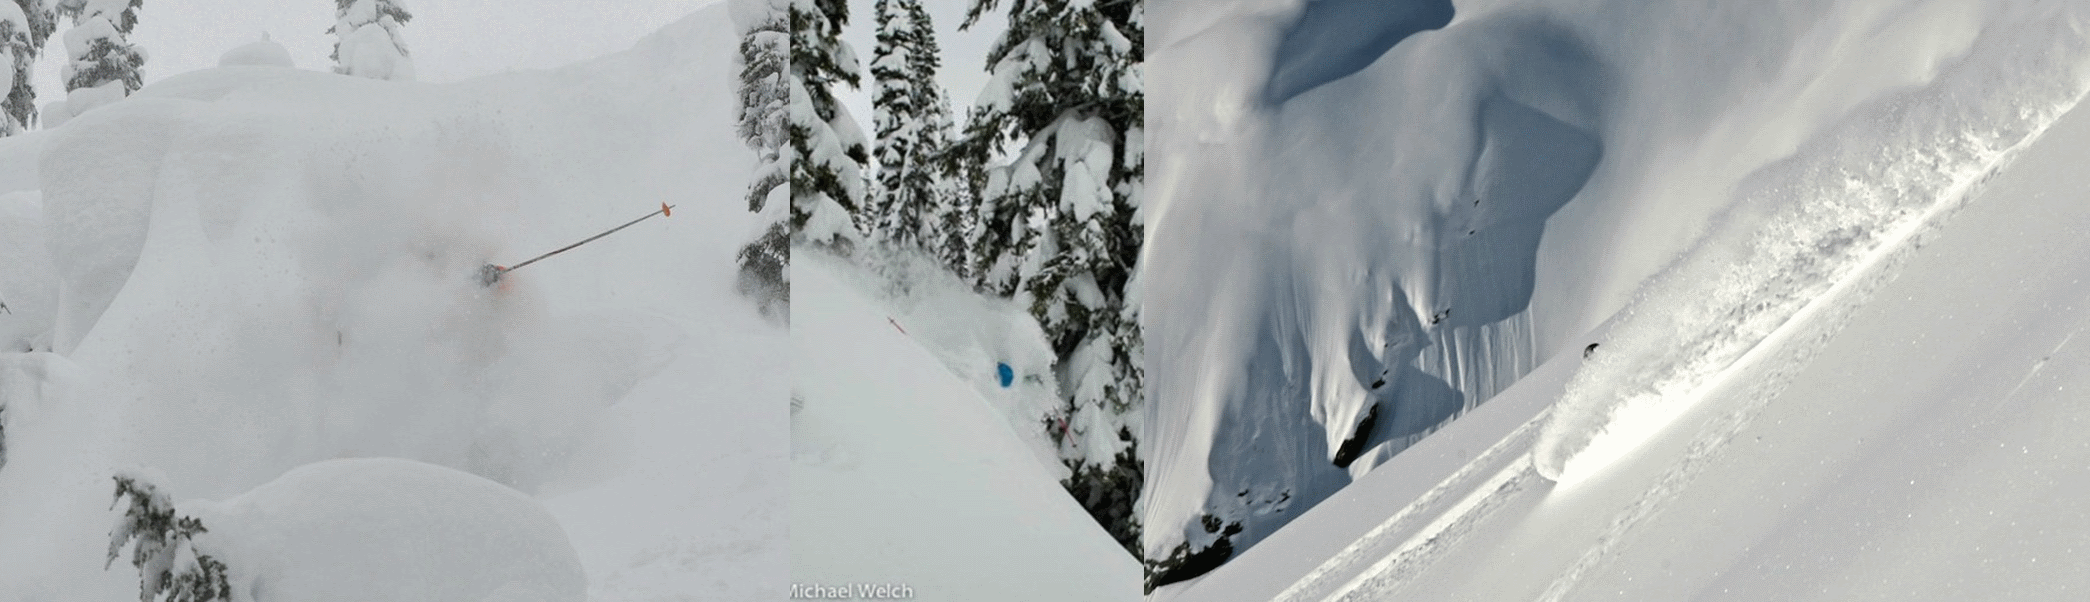 The Best Heli Skiing Photos of 2013